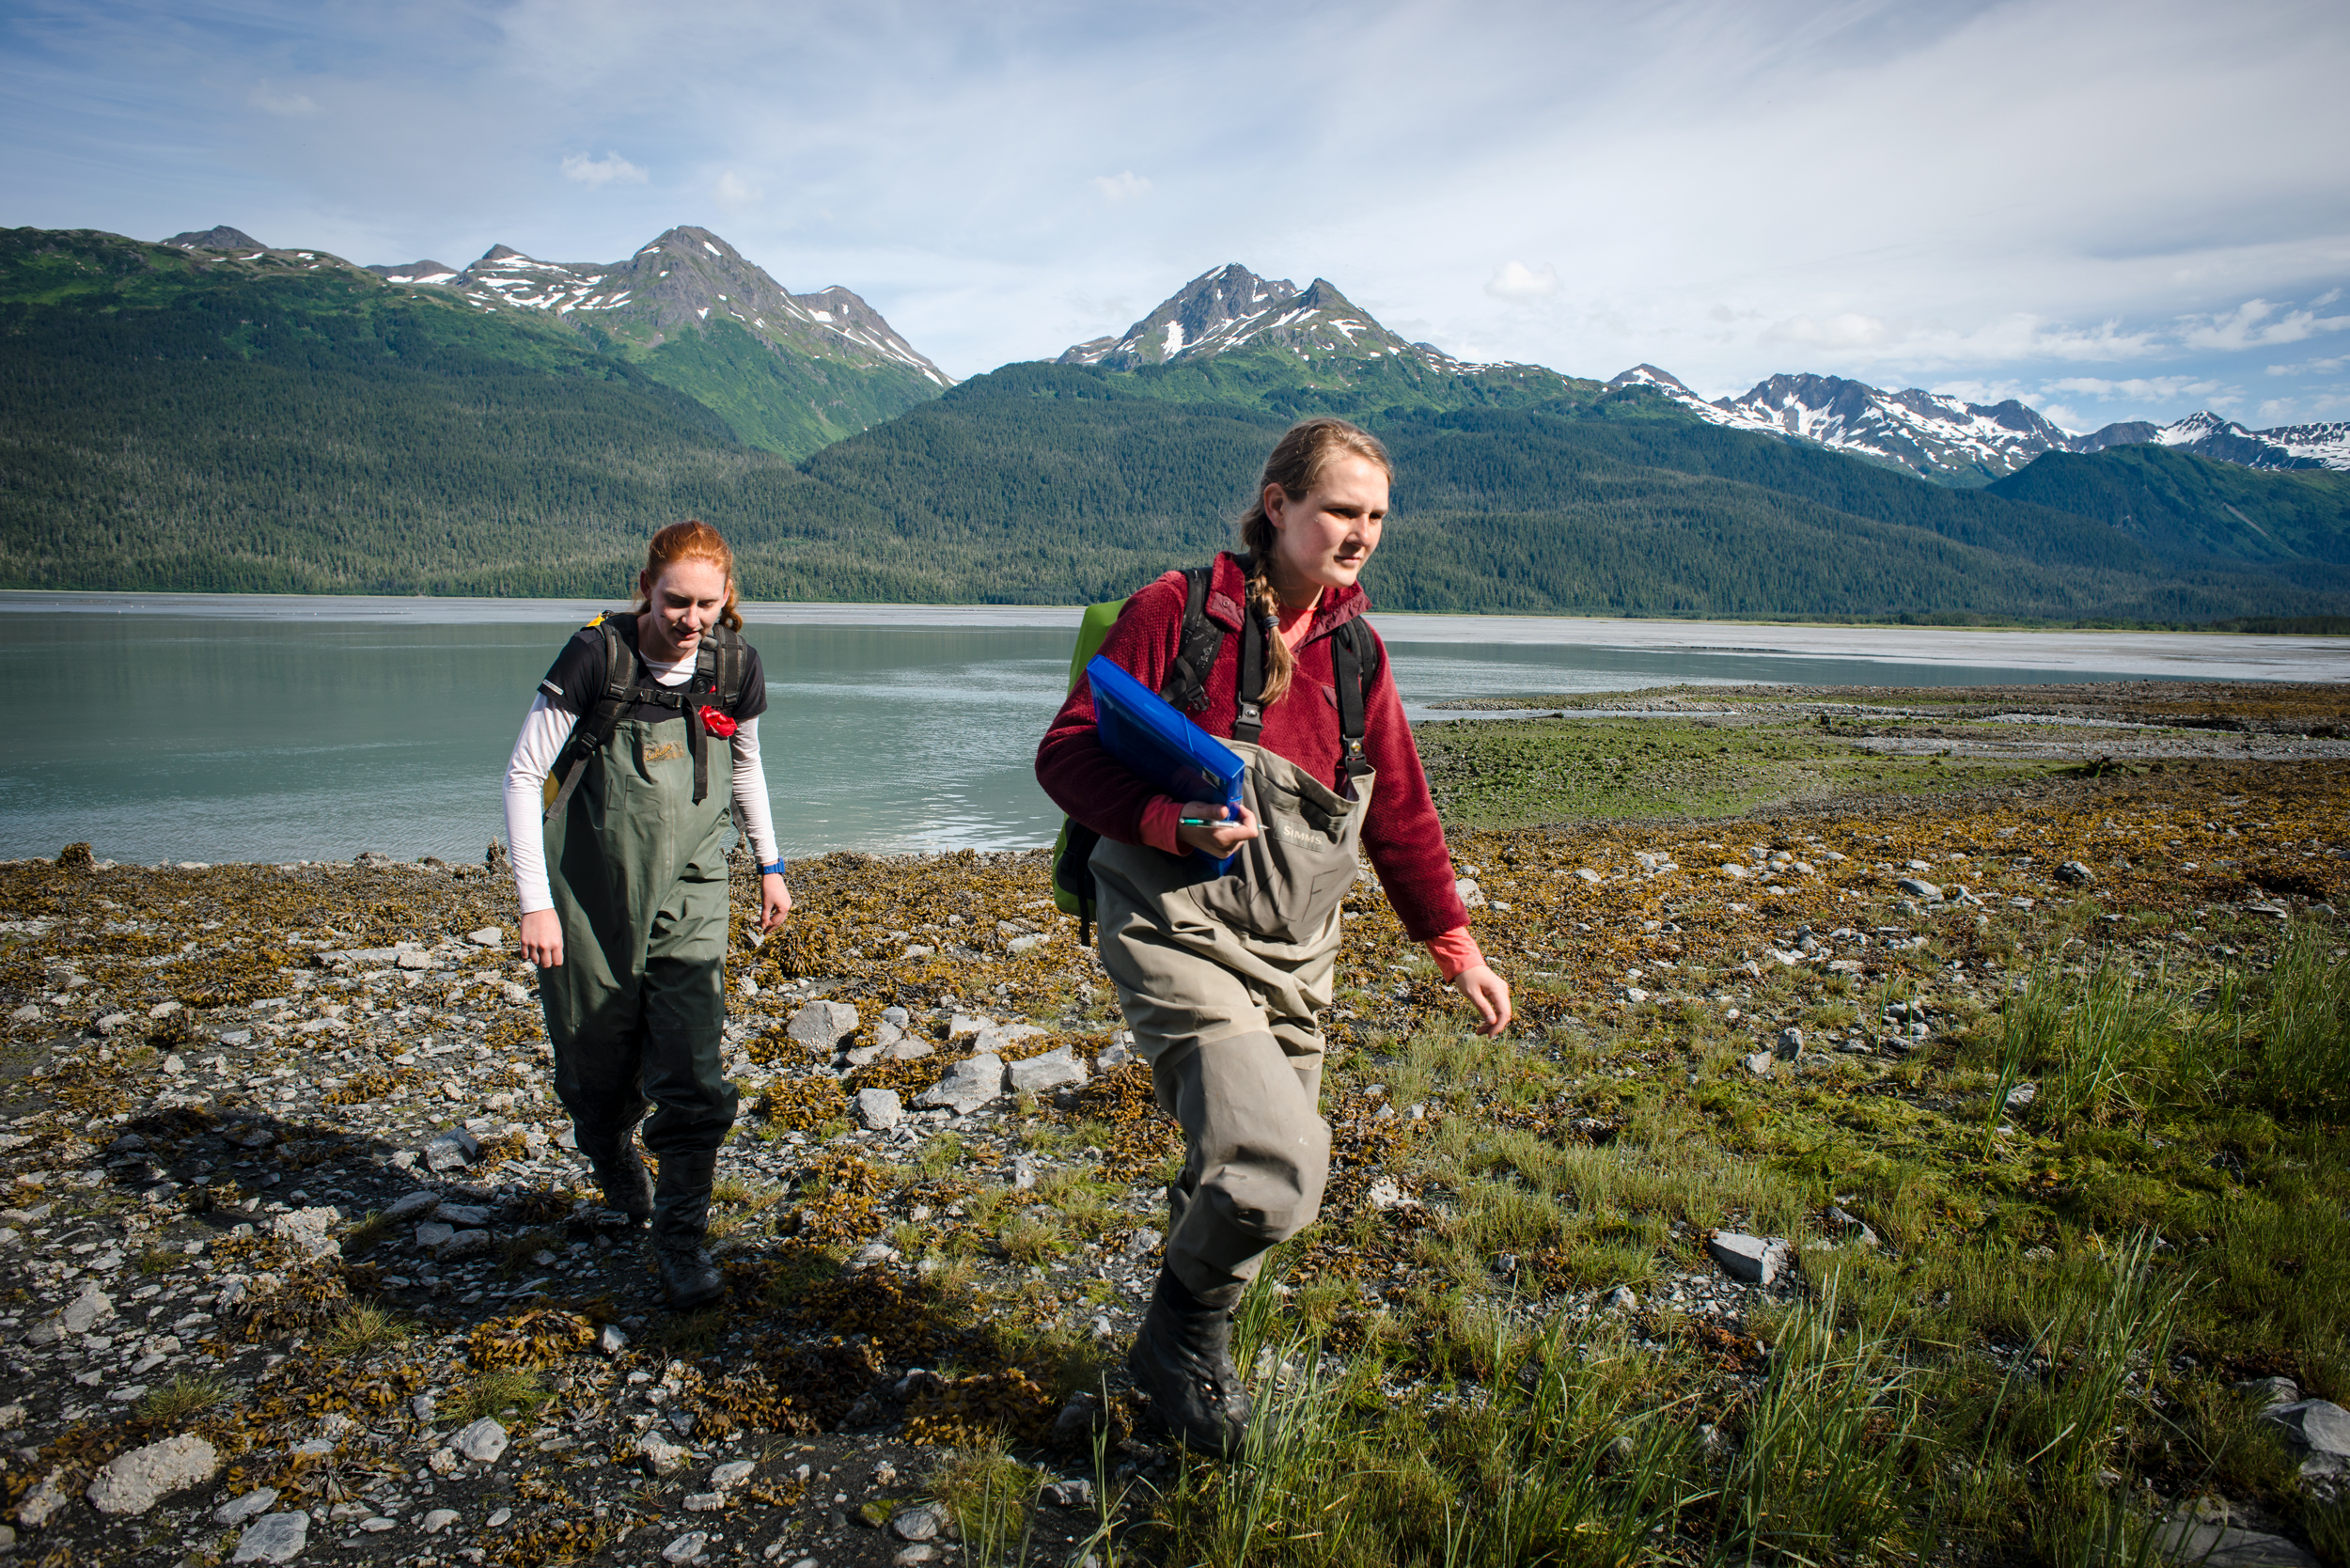  Harjoe and her undergraduate research assistant, Brooke Rigoni, start off their survey measuring the tide. In recent years, the Boreal Toad has become less prominent in the ecosystems around Cordova Alaska, so noting all of the day’s conditions are 